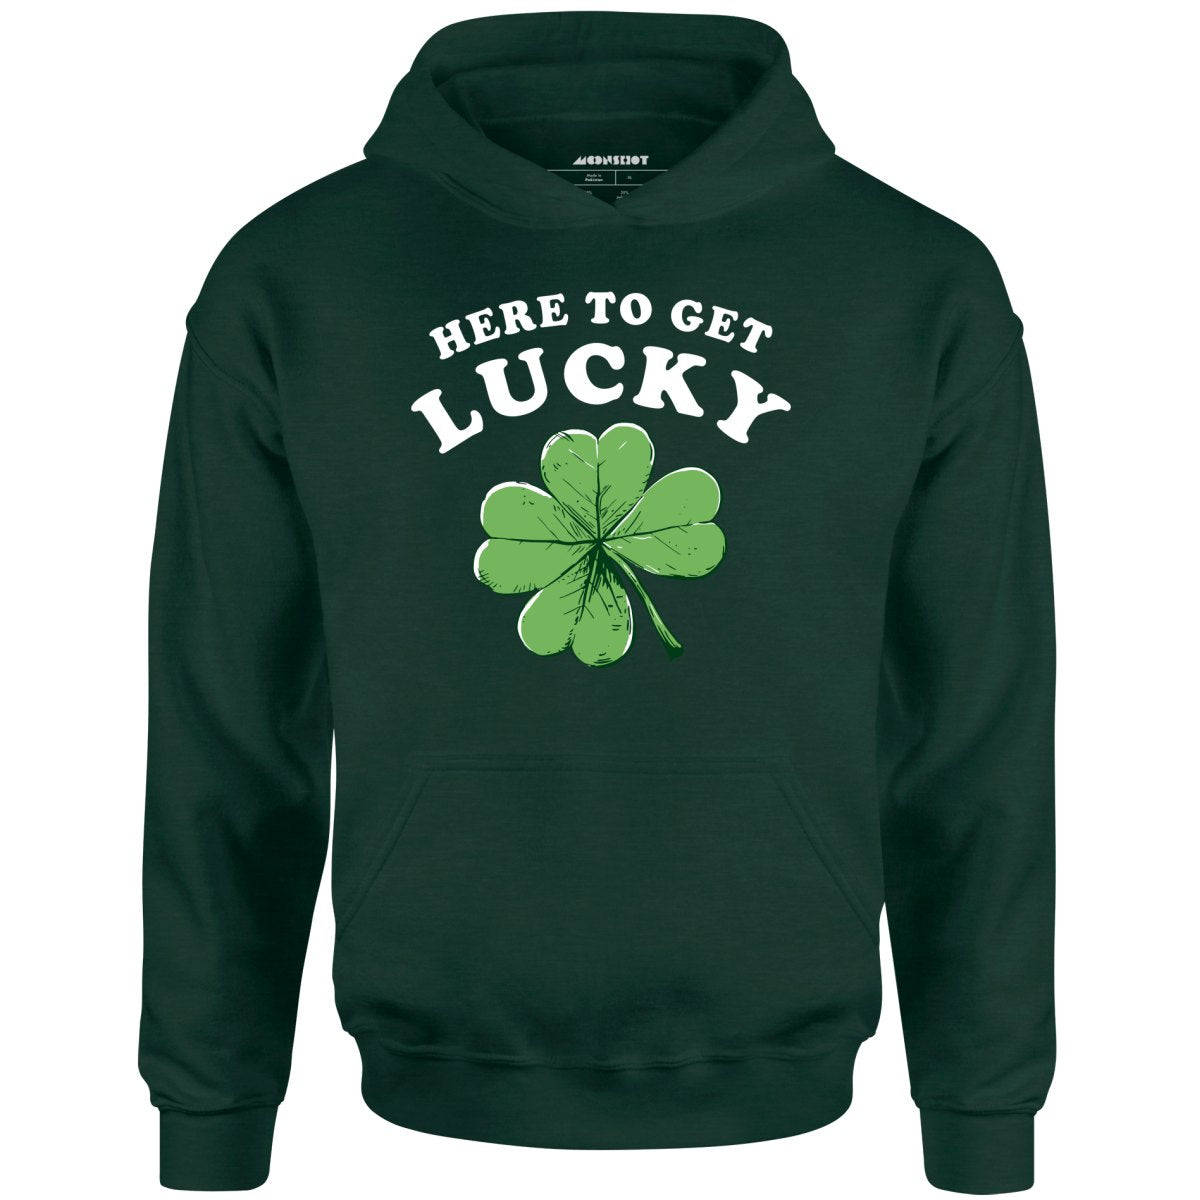 Here To Get Lucky - Unisex Hoodie